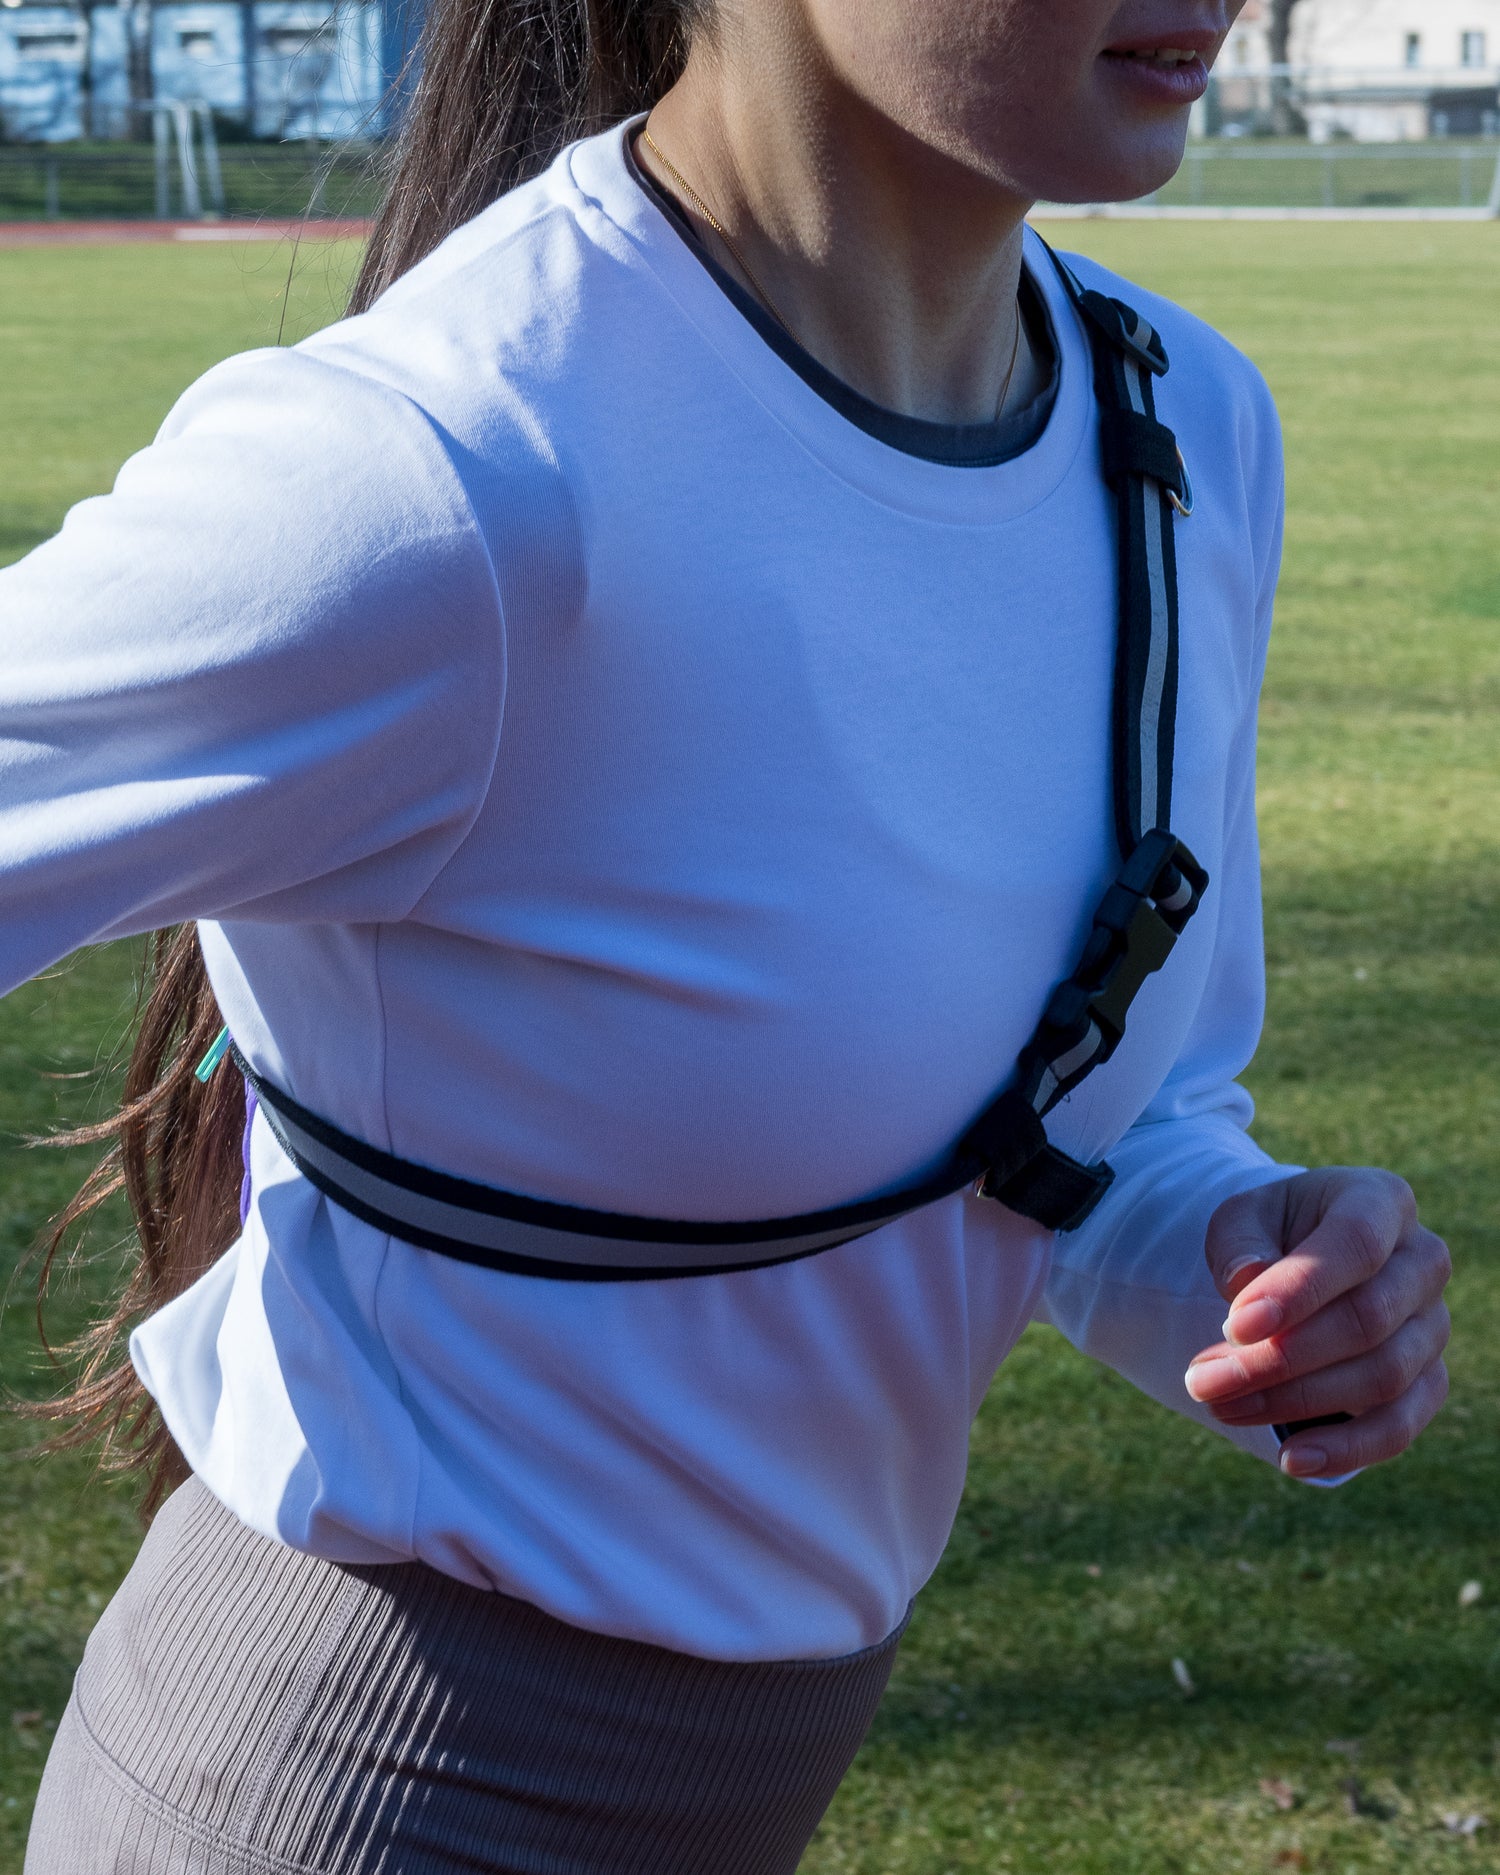 Runner wearing the SPORT.BAG with the reflective T-strap securely velcroed to her chest.